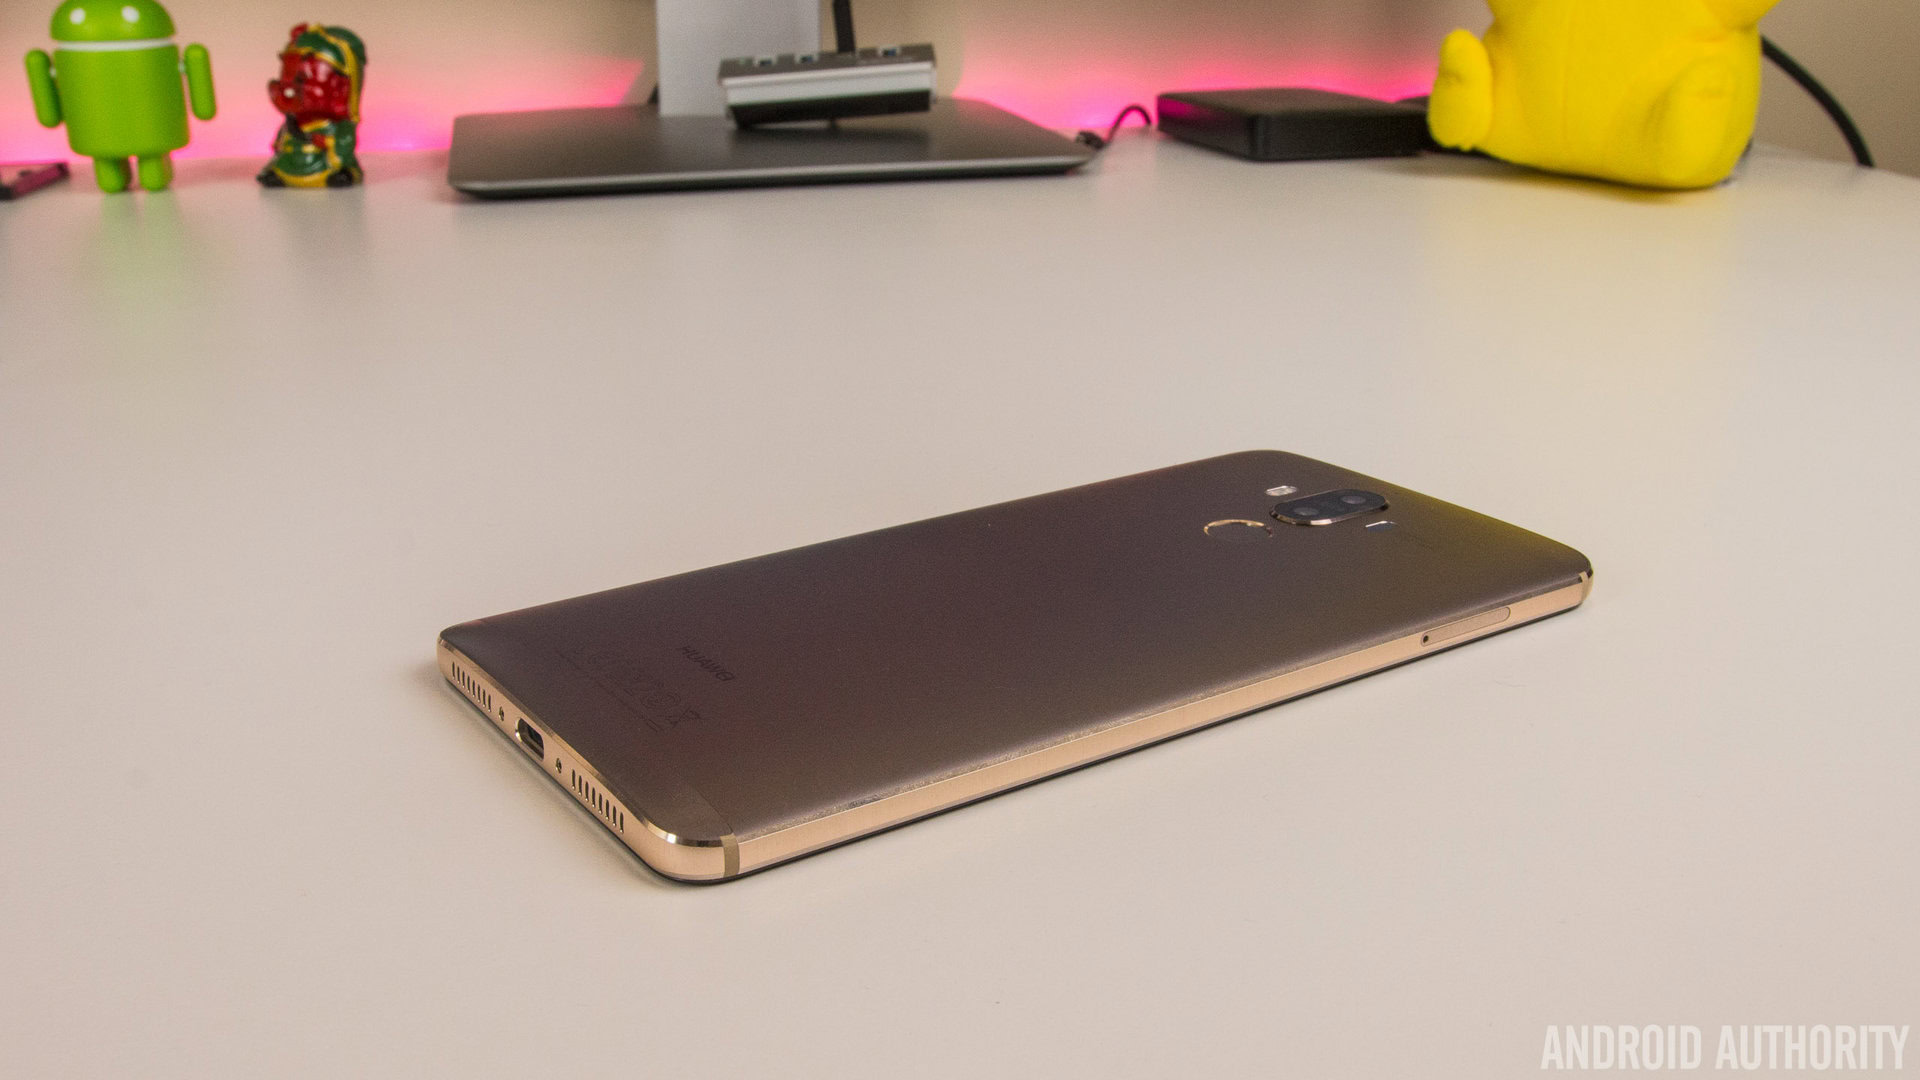 Citaat Knikken kader HUAWEI Mate 9 problems - here is how to fix those issues